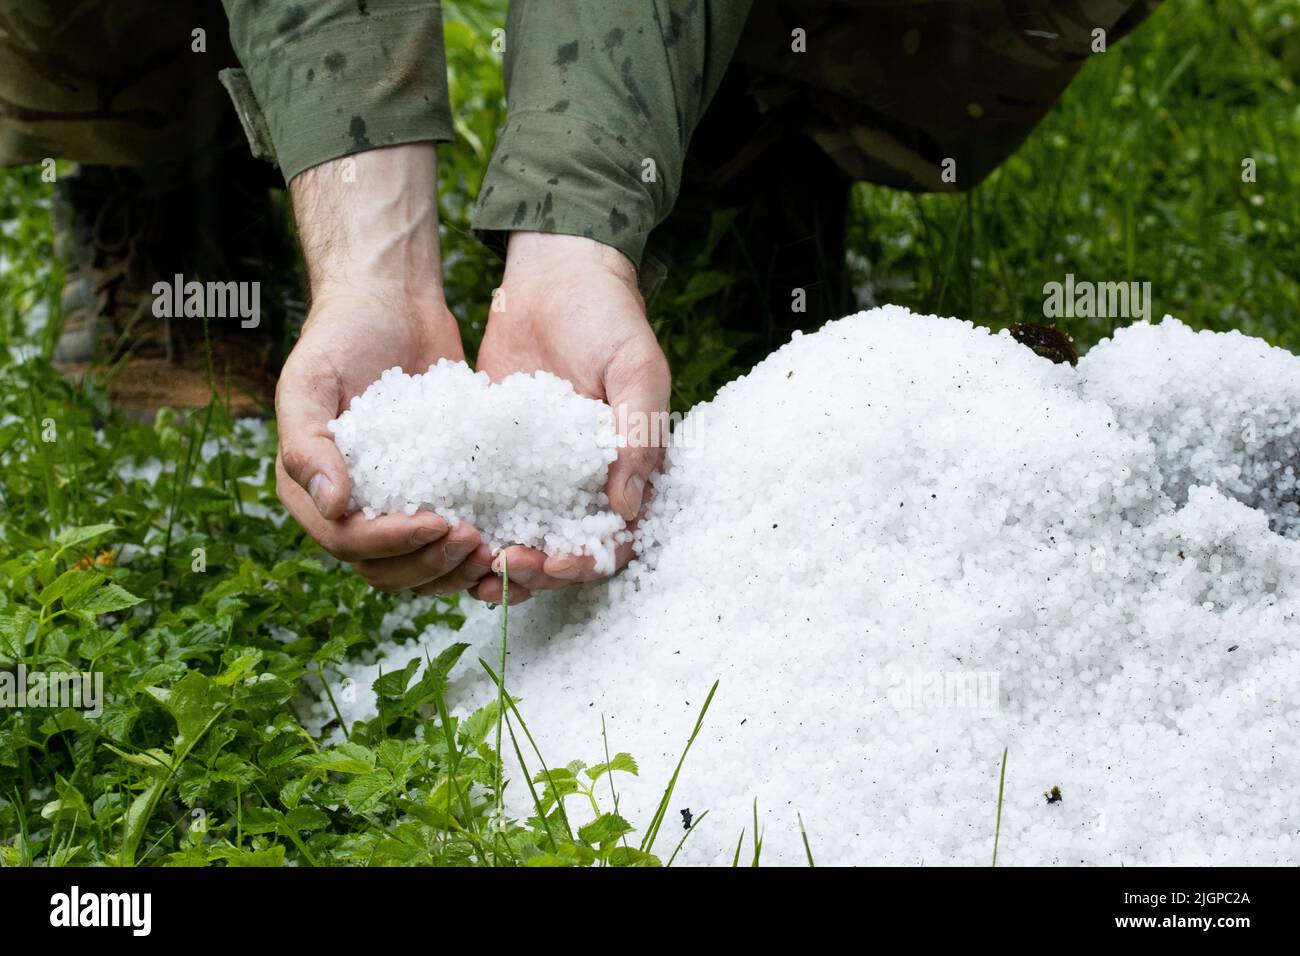 Large pile of fresh hail on the human hands and on the grass Stock Photo